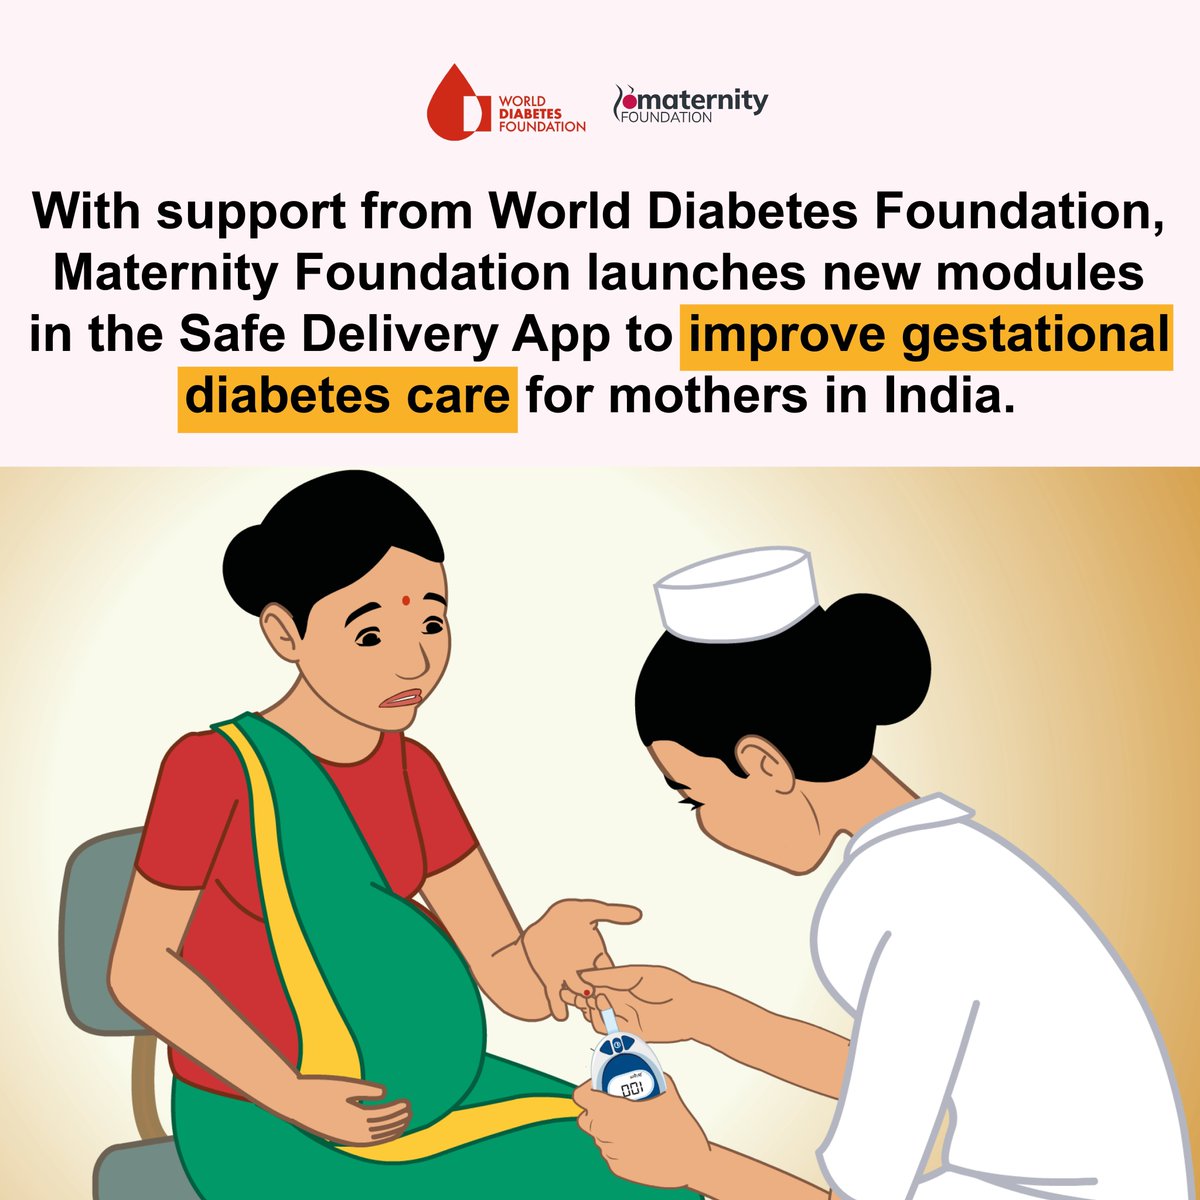 Launching new modules on gestational diabetes mellitus (GDM) and antenatal care (ANC) in the Safe Delivery App in India! With support from WDF, we are supporting the Indian Gov.’s ongoing efforts to improve gestational diabetes care for mothers. 👉 bit.ly/3vpTprp